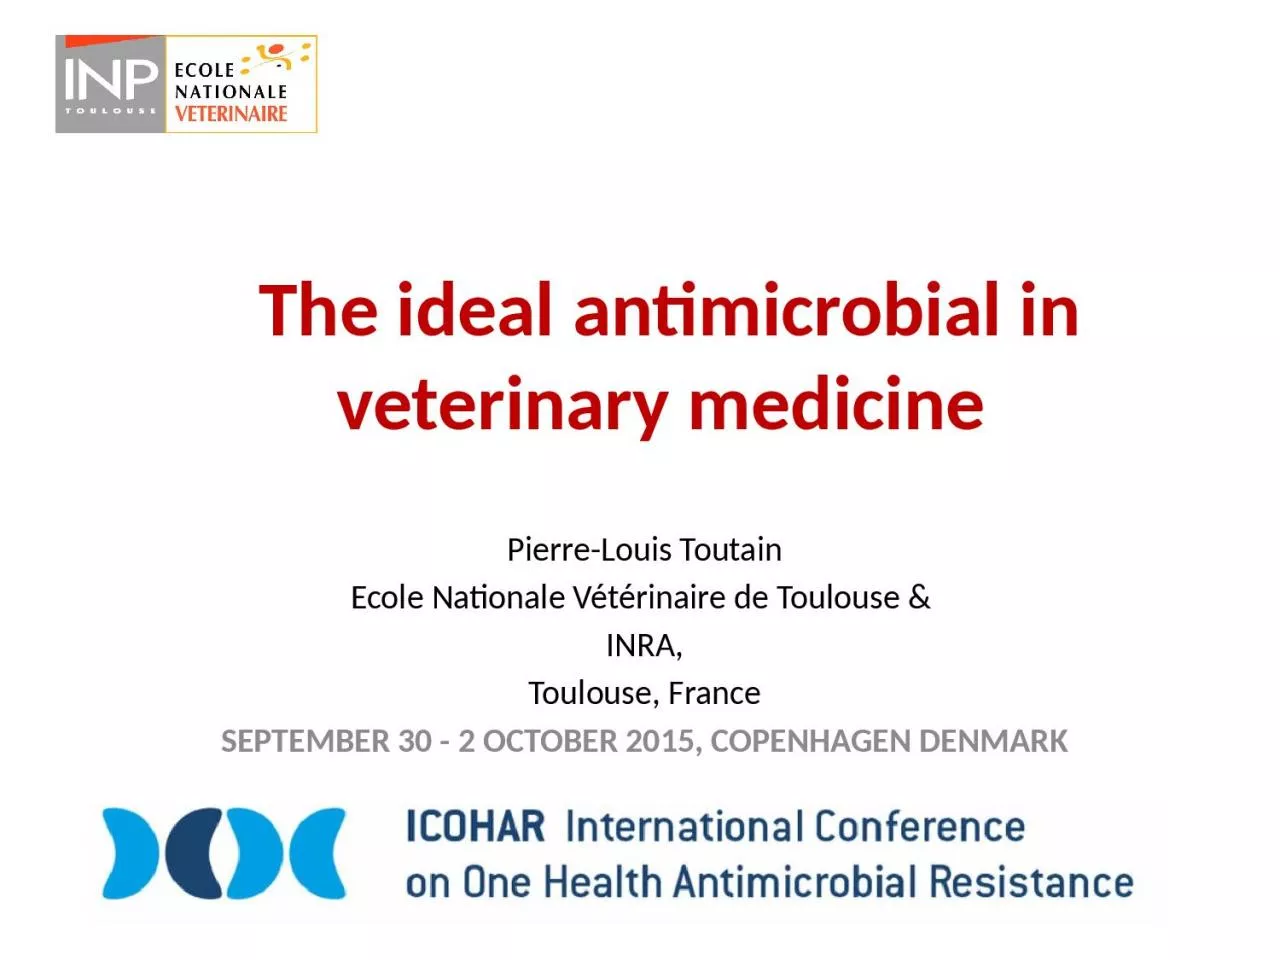 The ideal antimicrobial in veterinary